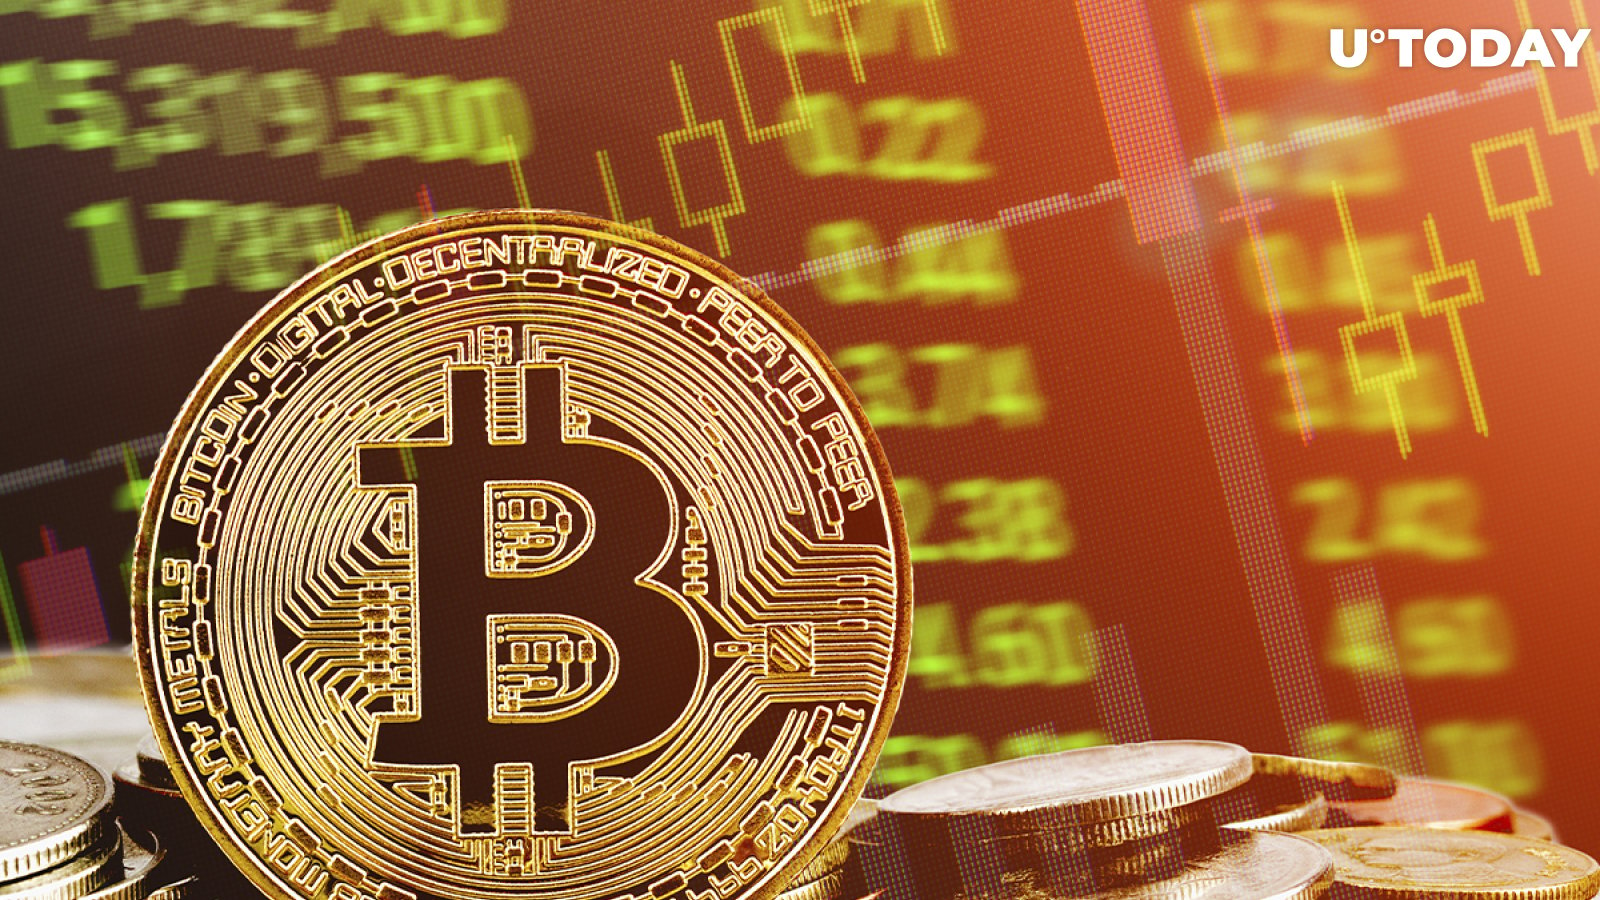 Bitcoin Market Cap Hits New All-Time High as BTC Remains 2.2% Off Its April ATH